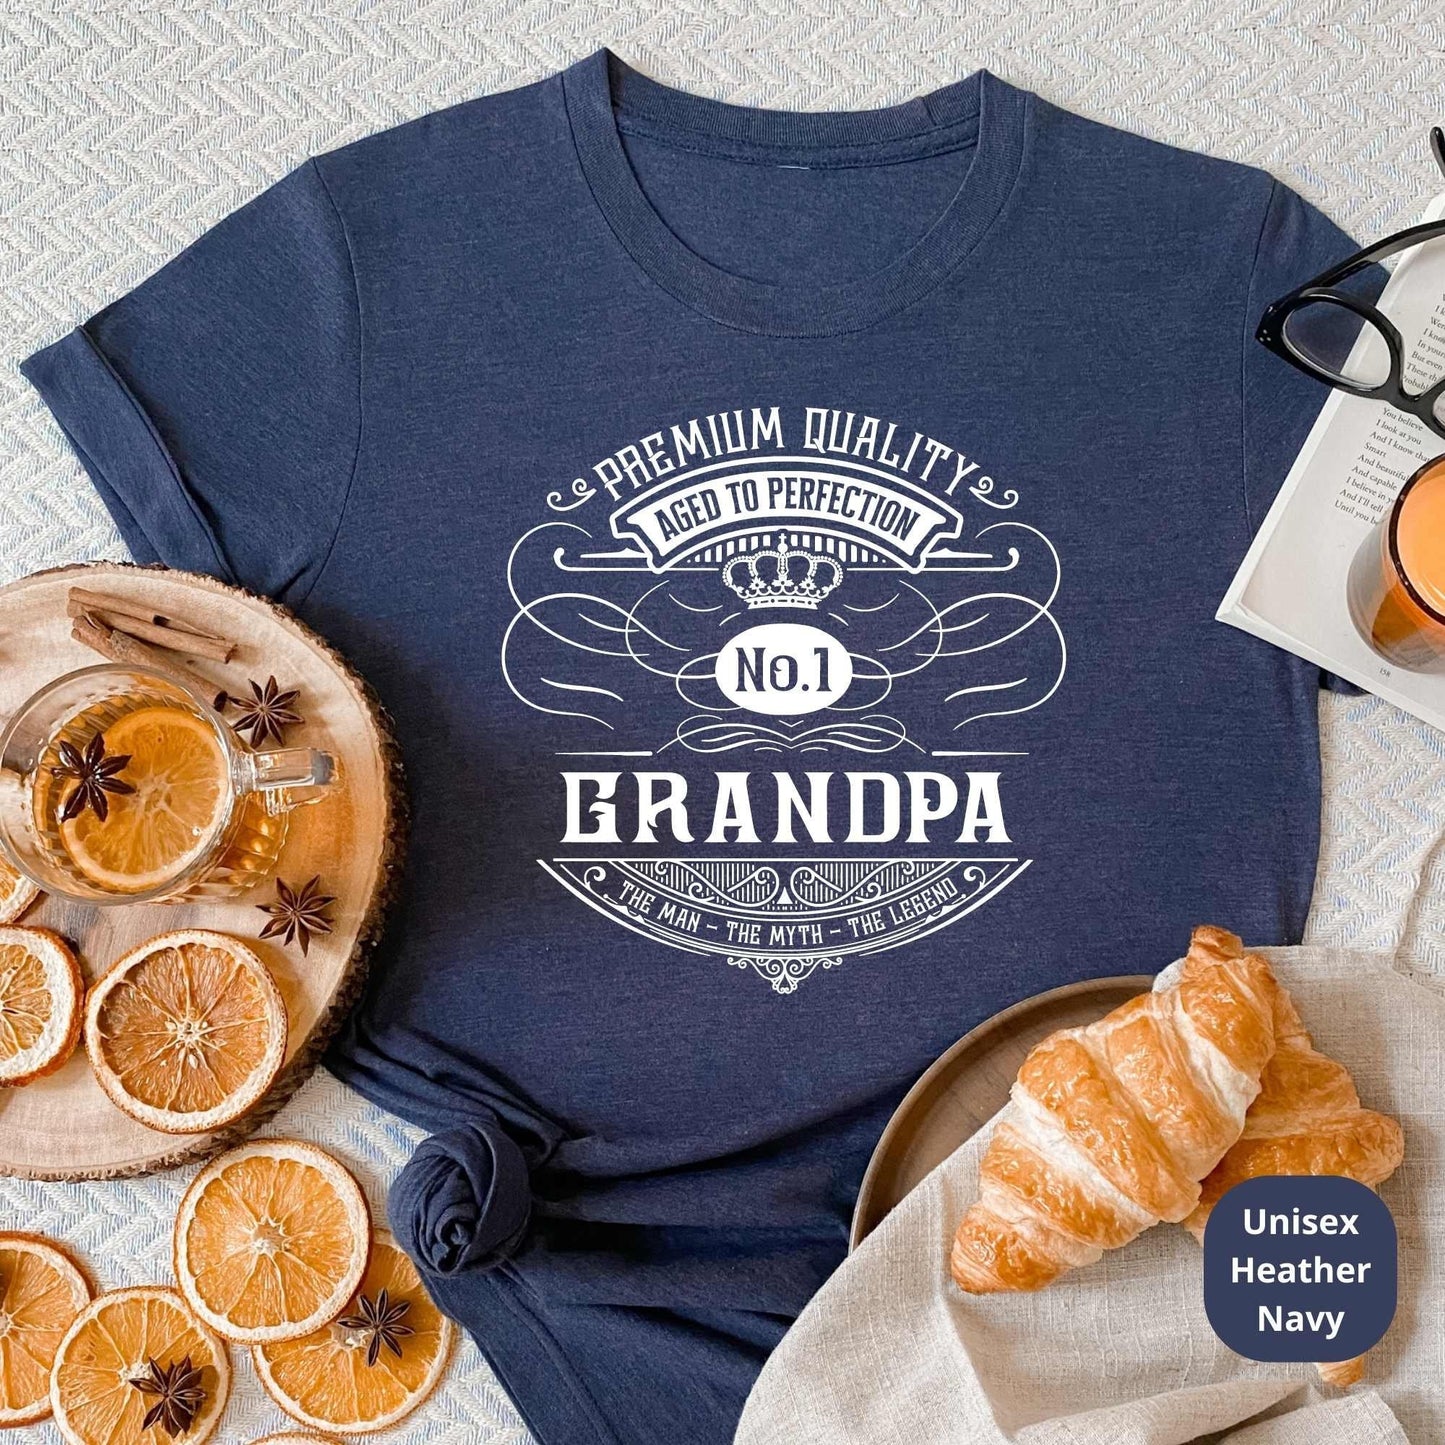 Family Reunion Matching Tees for Photos, Pregnancy Reveal Shirts, Baby Announcement Photographs, Baby Shower, Parents & Grandparents Gifts HMDesignStudioUS